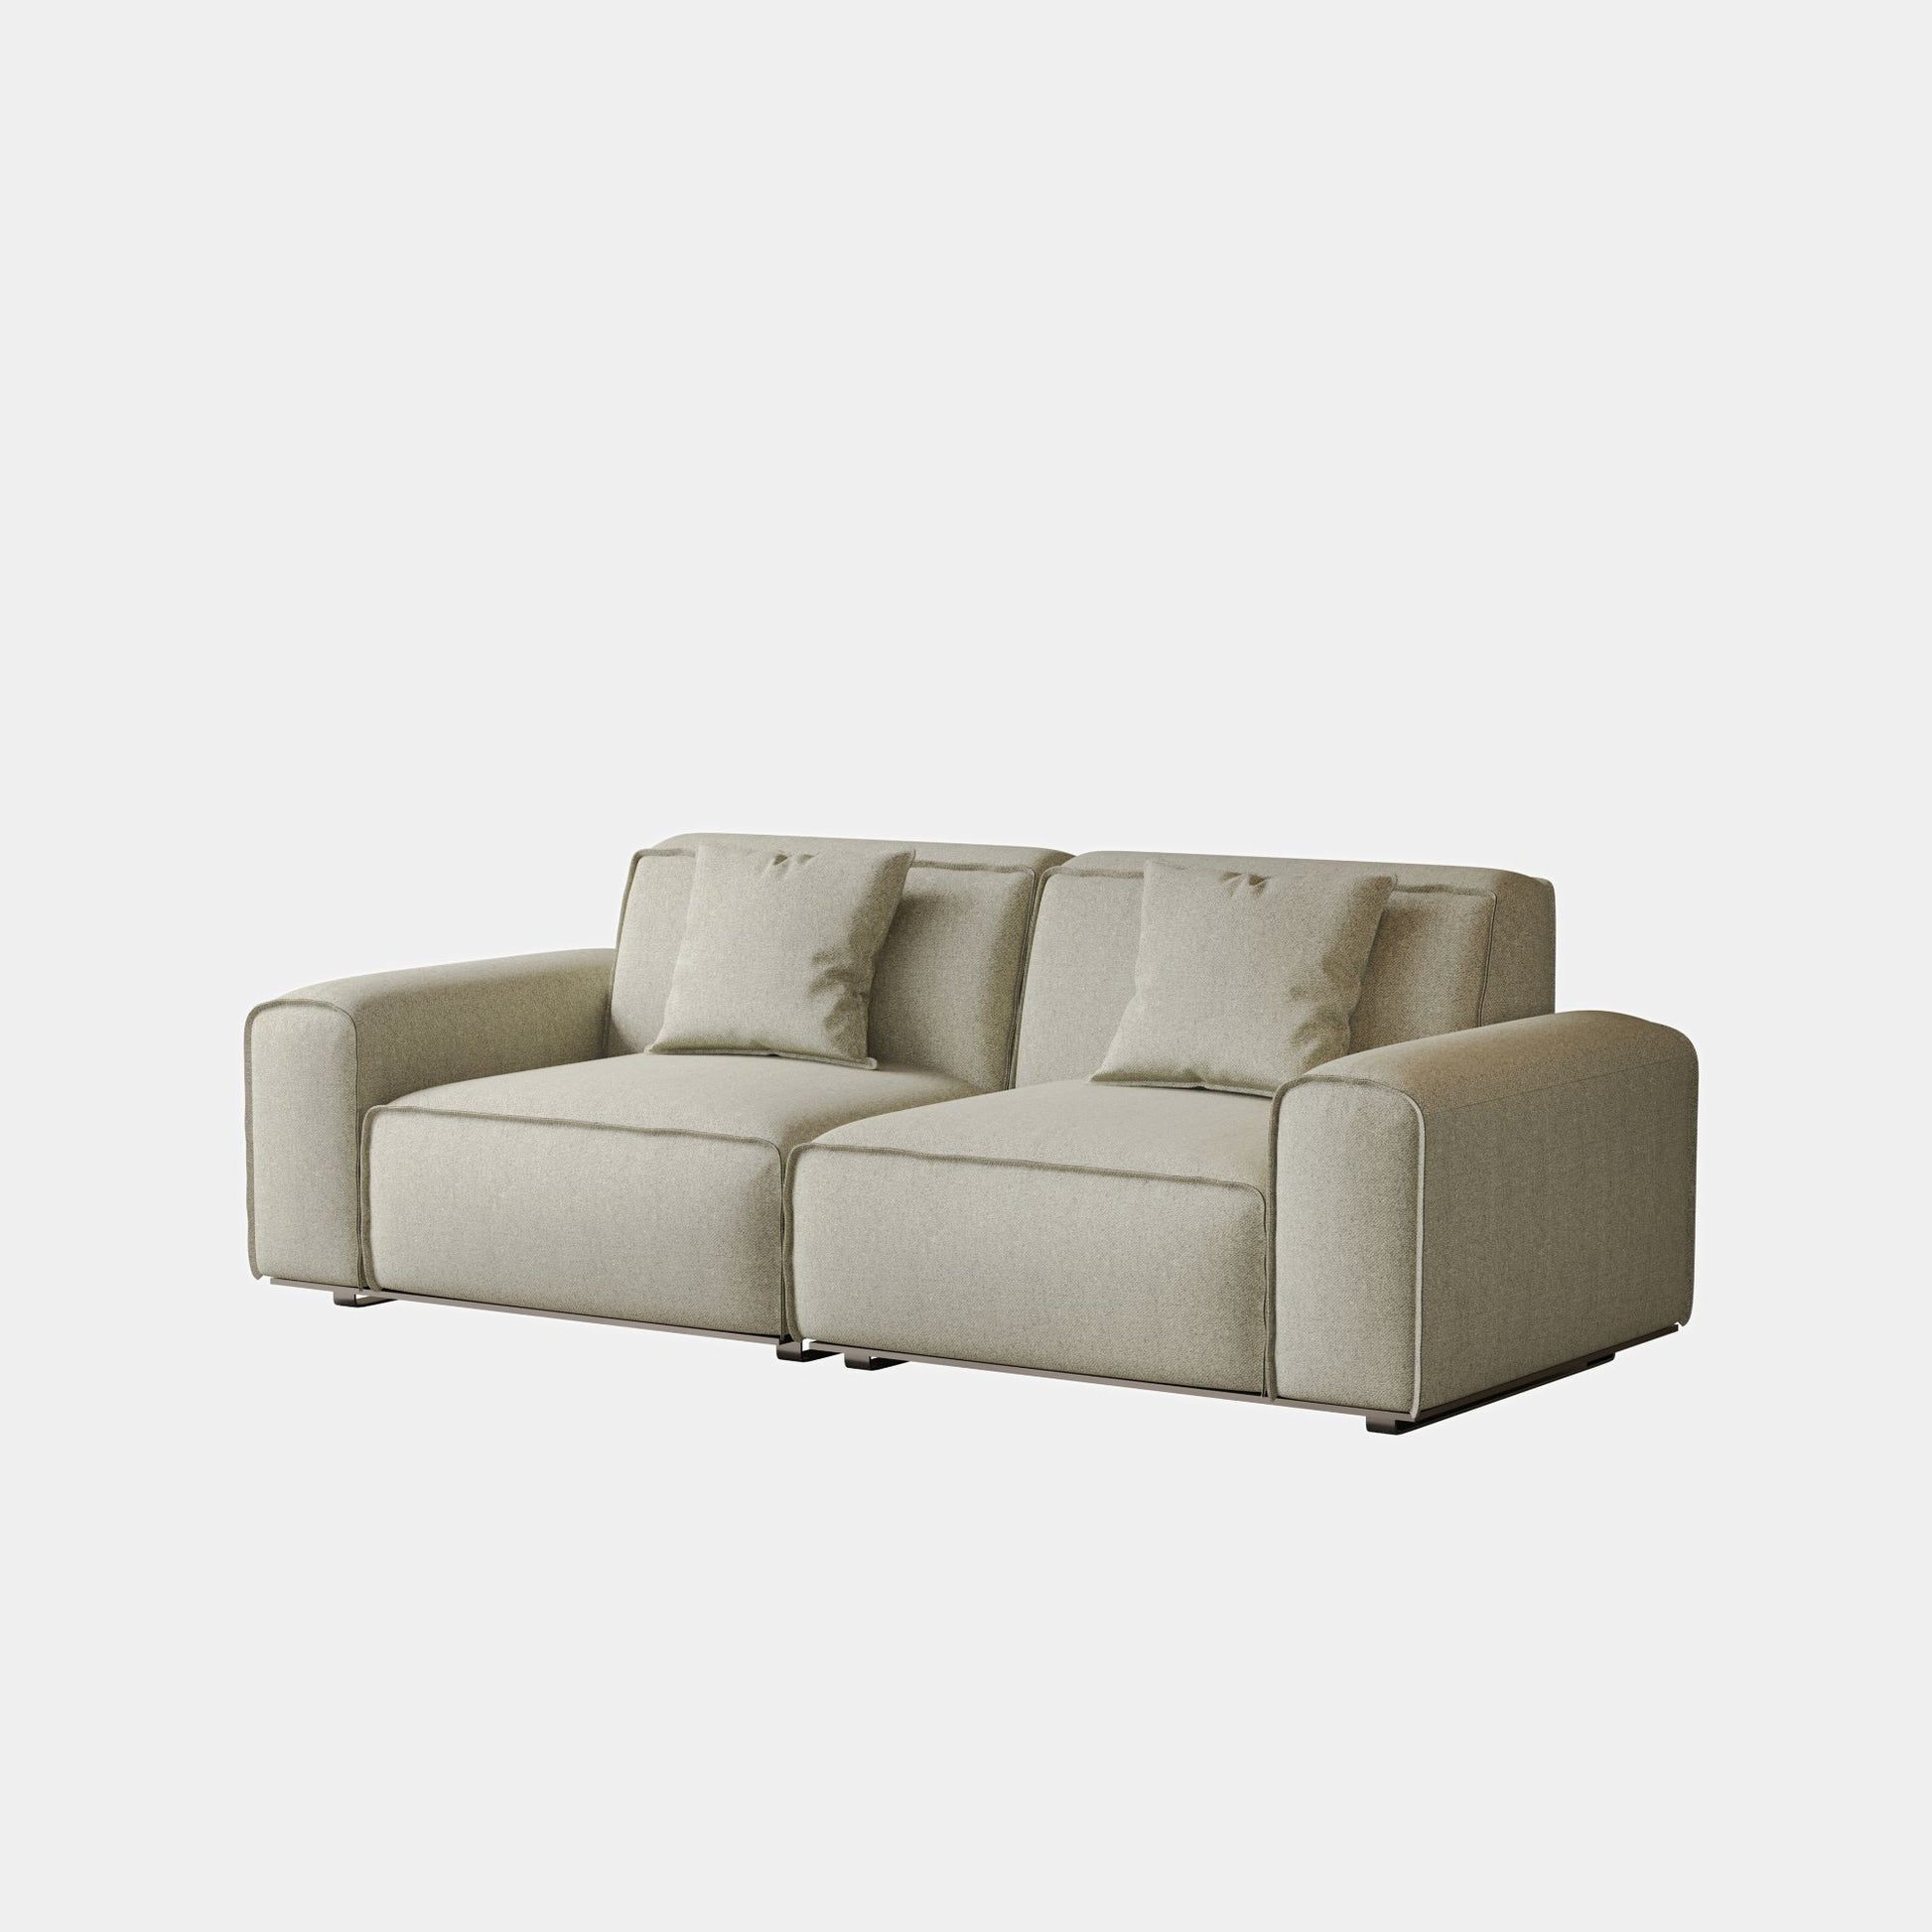 Colby white polyester blend 2 seat fabric sofa